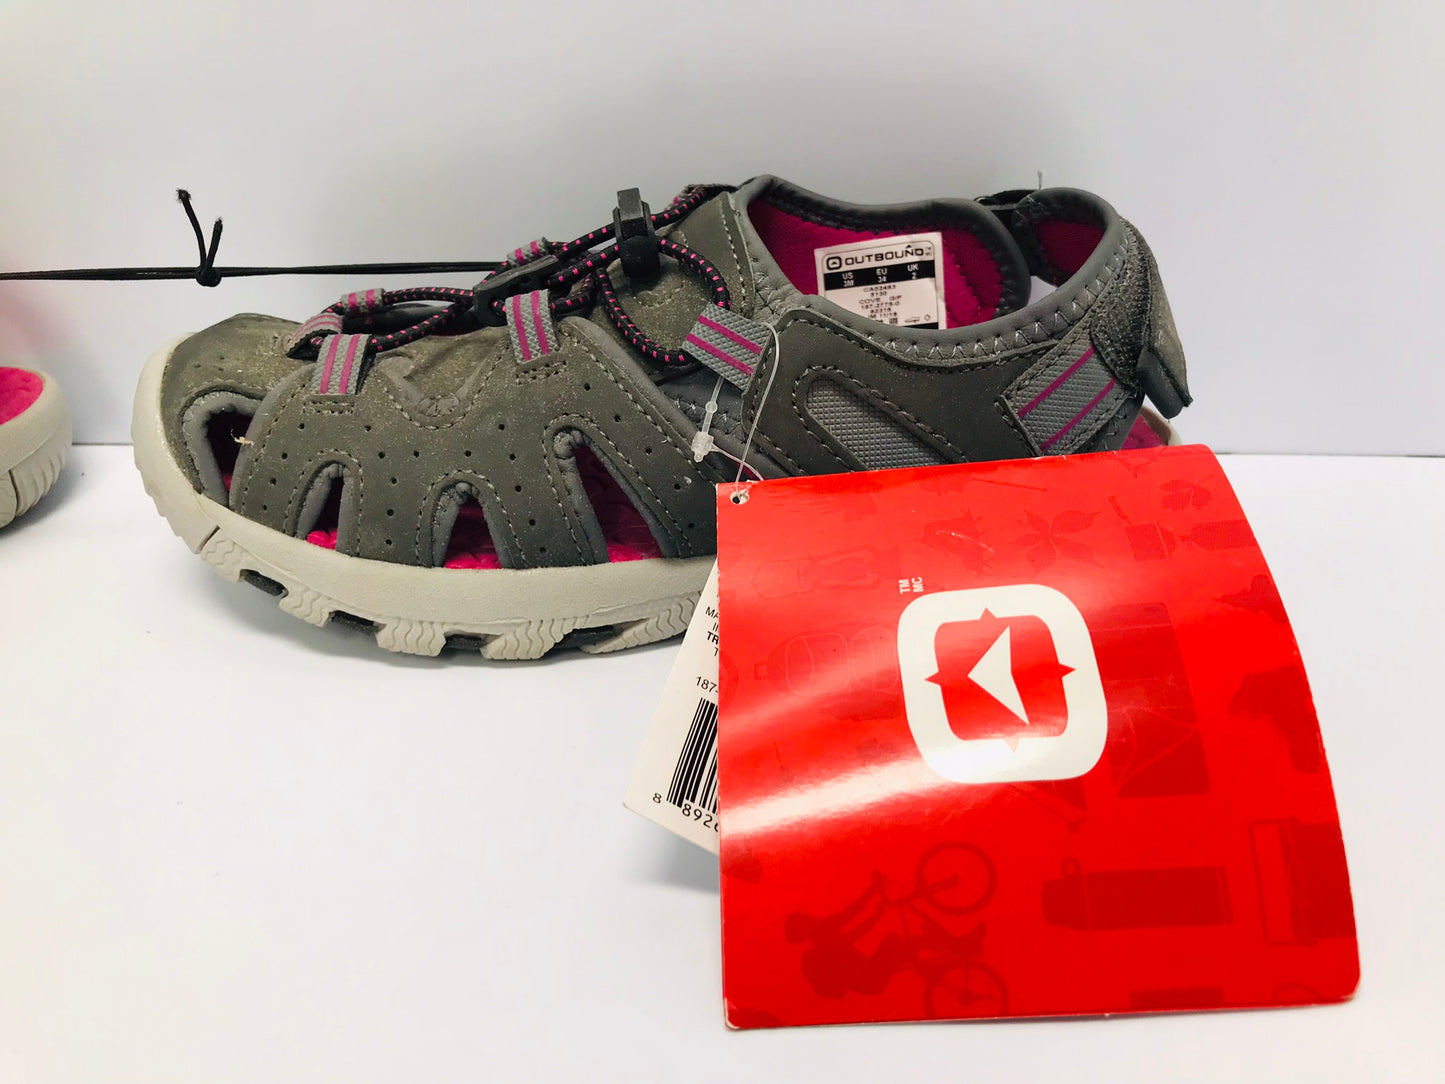 Sandles Child Size 3 Outbound Cove New With Tags Grey Pink